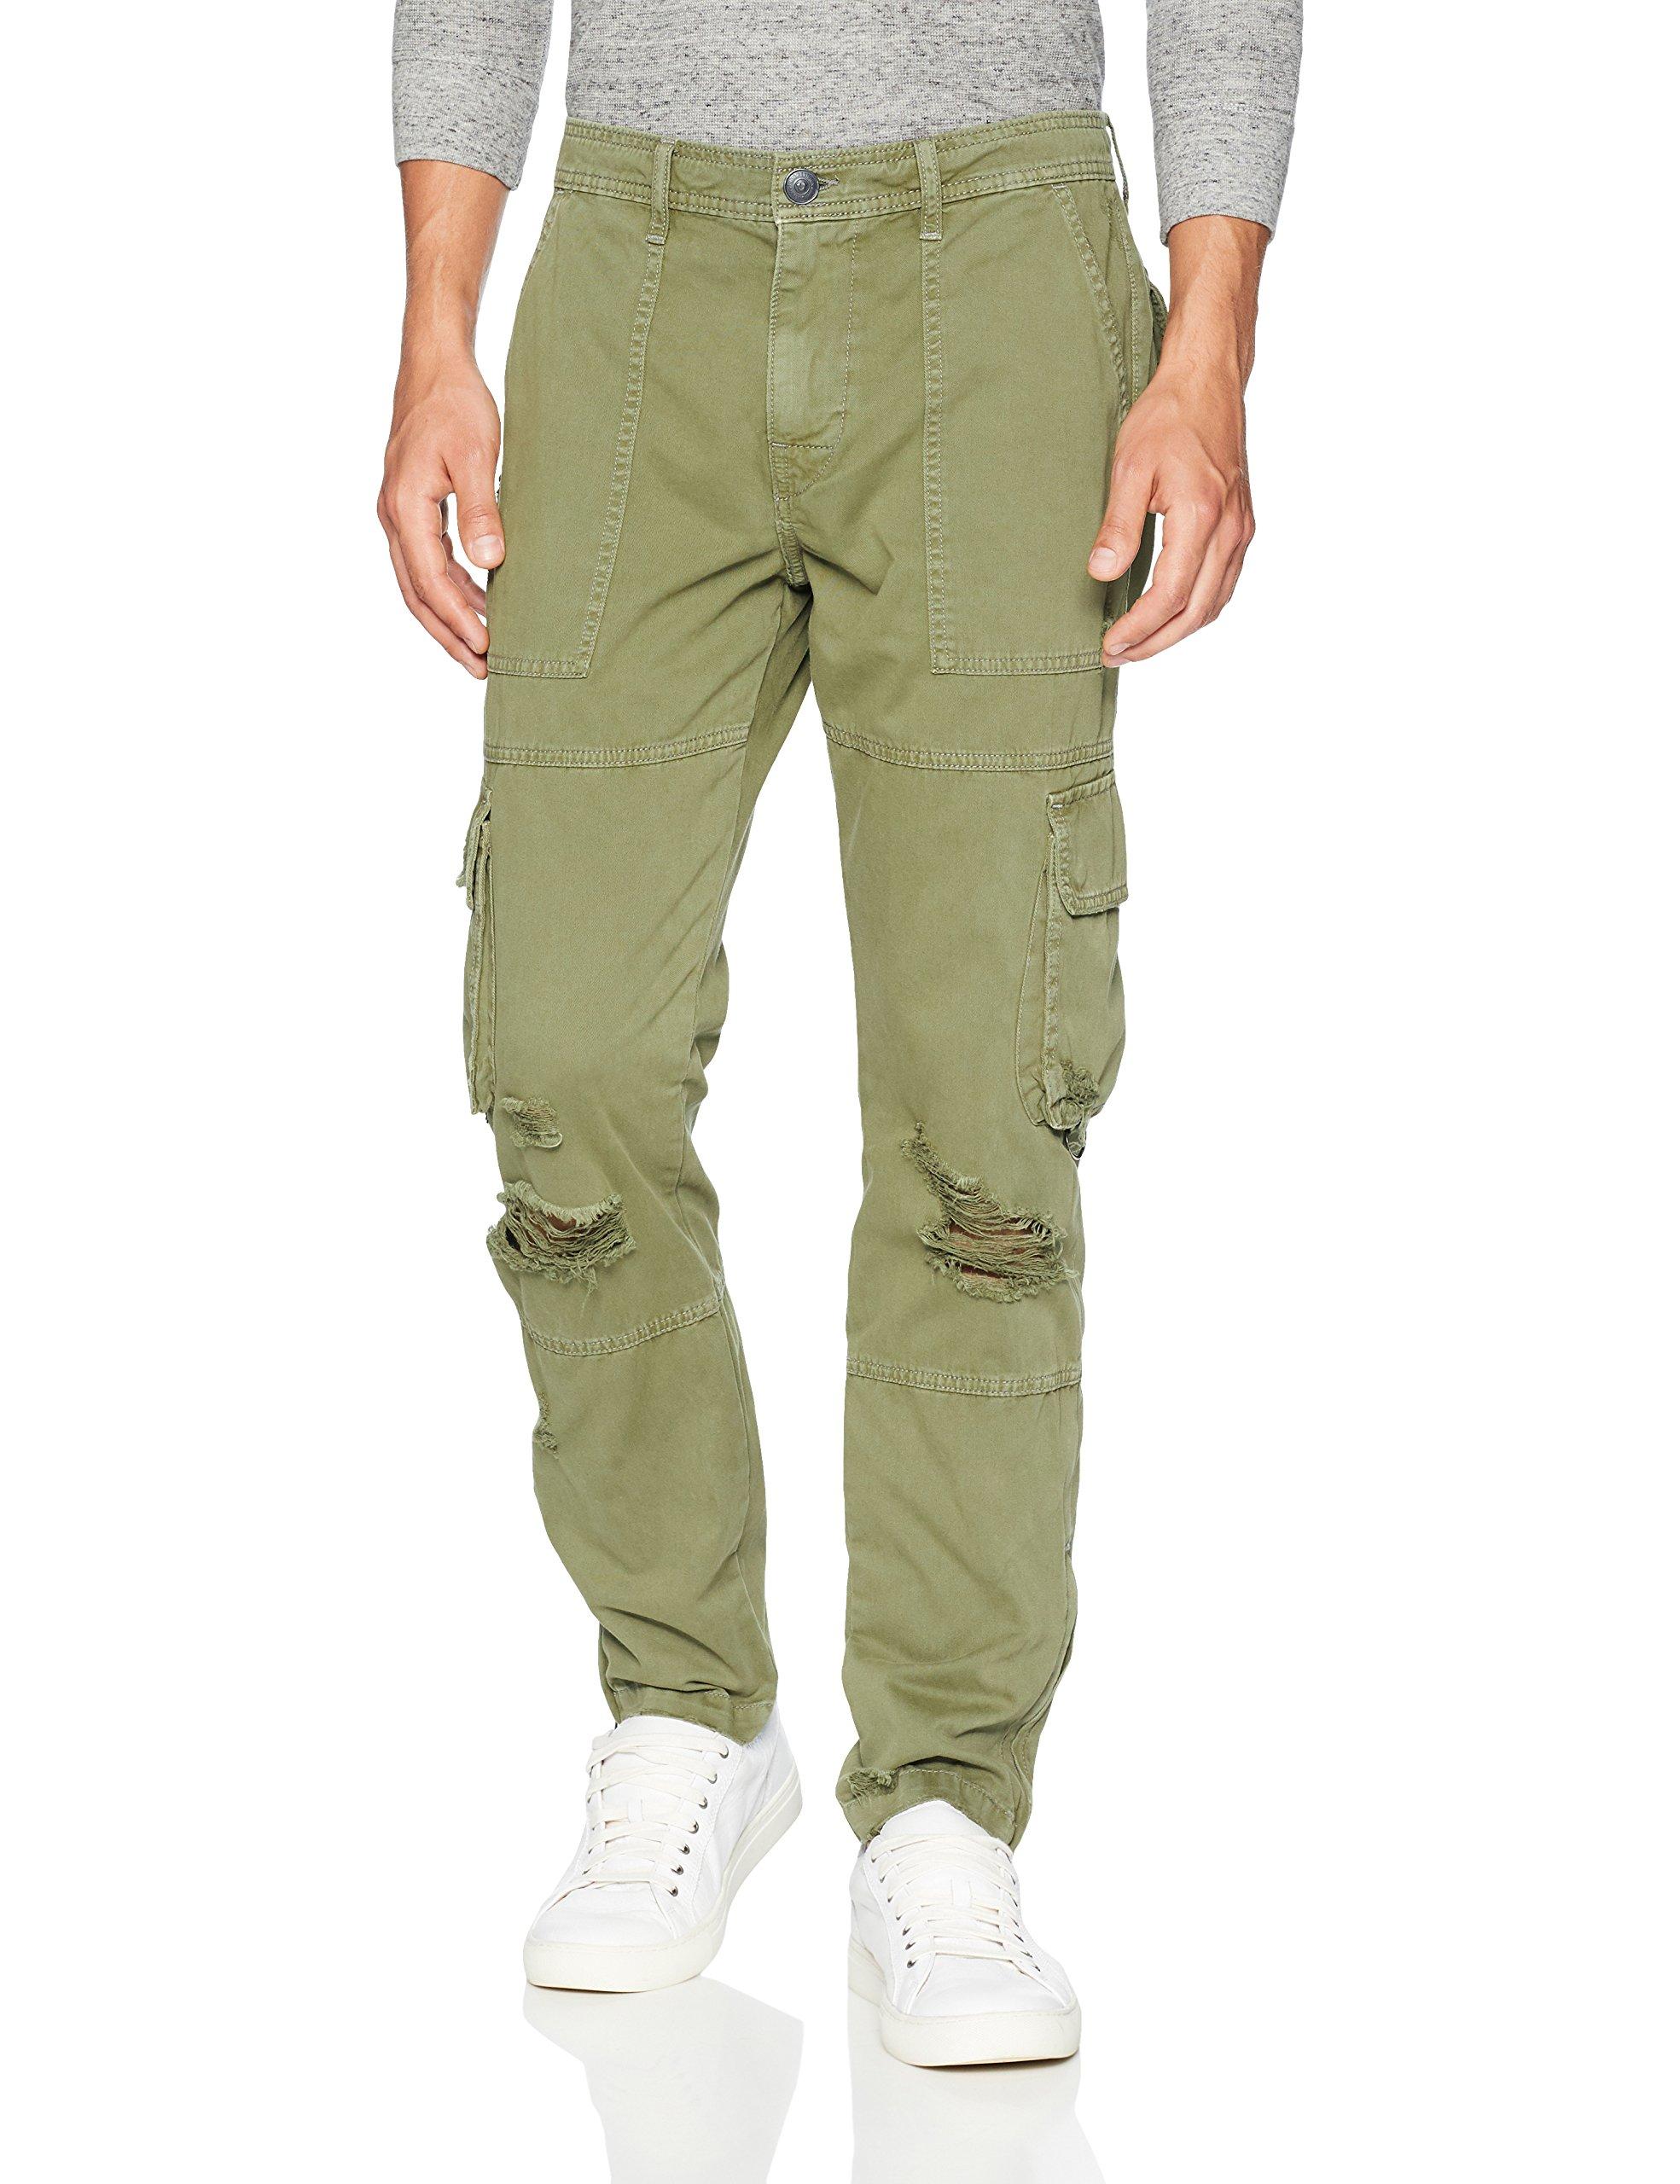 Aggregate more than 85 mens military cargo pants super hot - in.eteachers